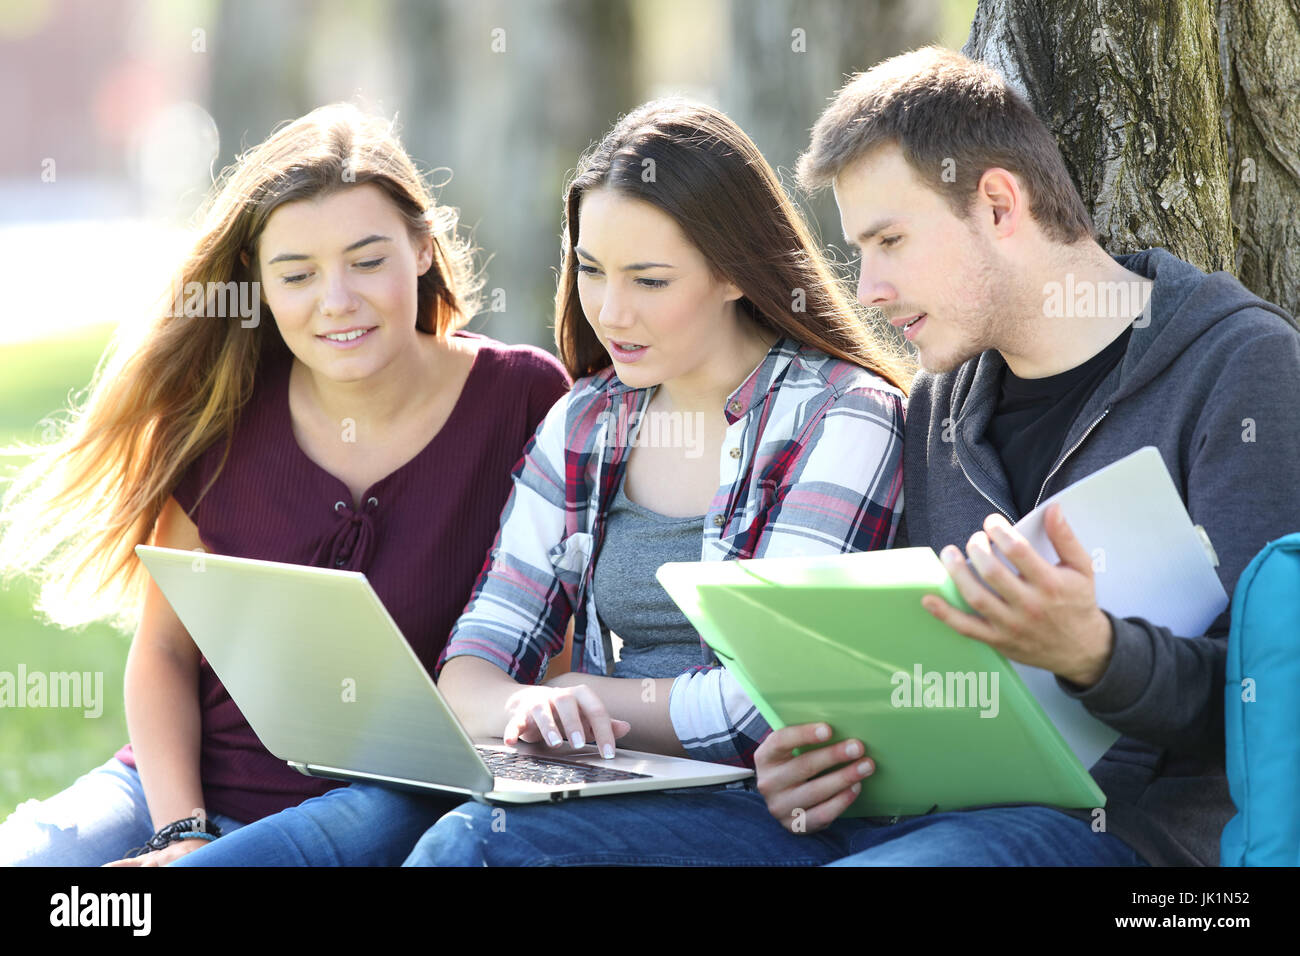 Three attentive students learning on line together with a laptop and notebook sitting on the grass in a park Stock Photo